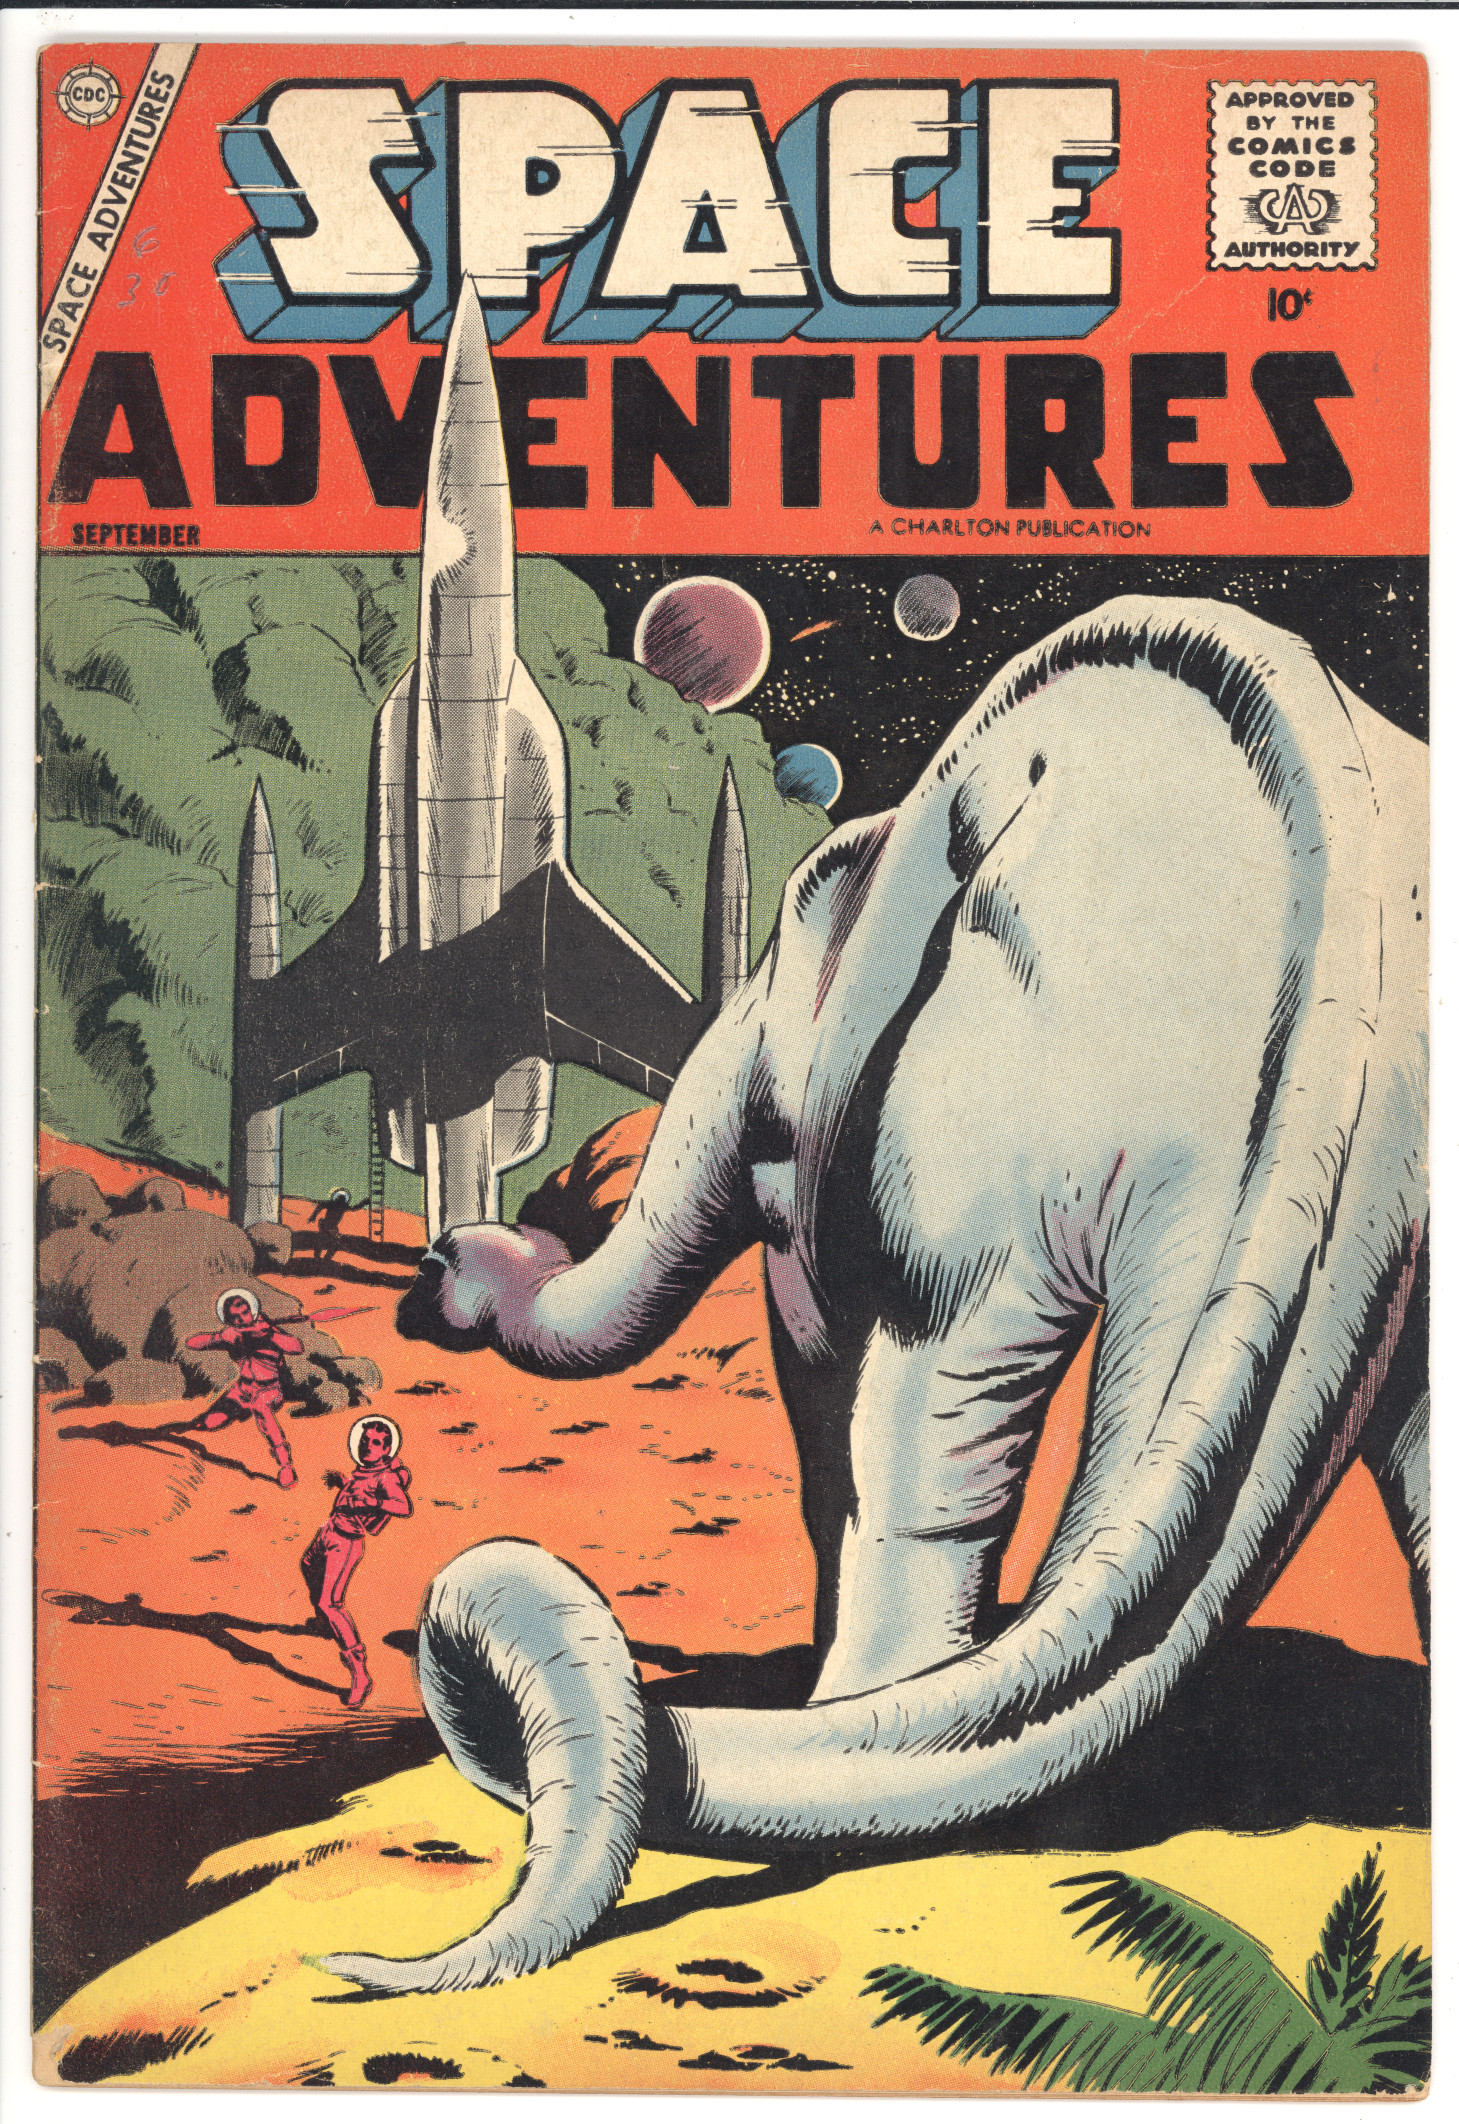 Space Adventures #25 front